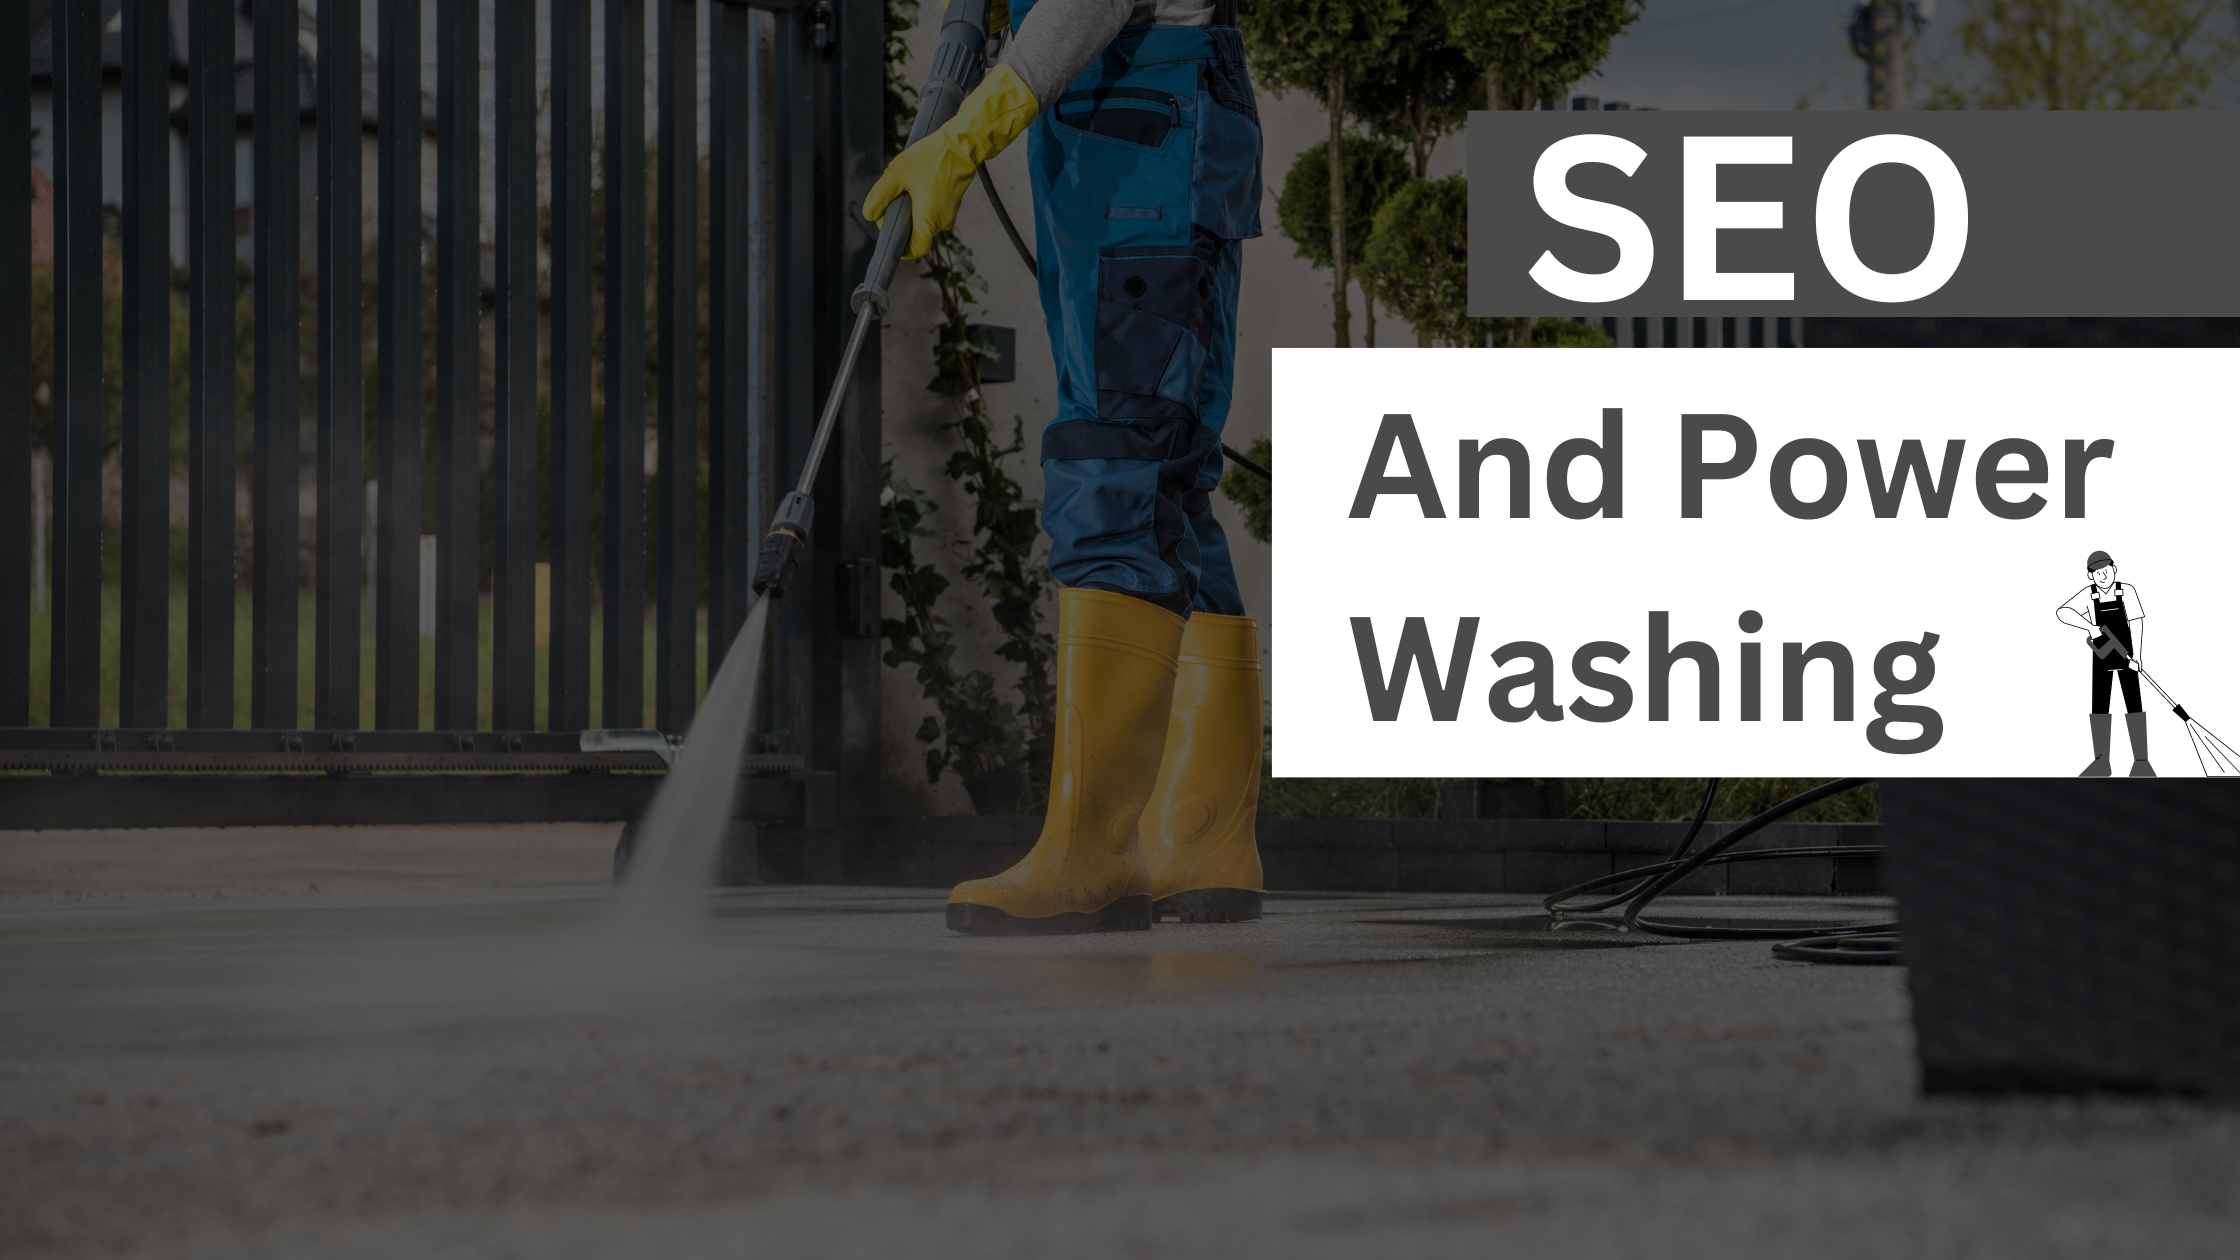 Work of SEO Marketing in Washing Services Online